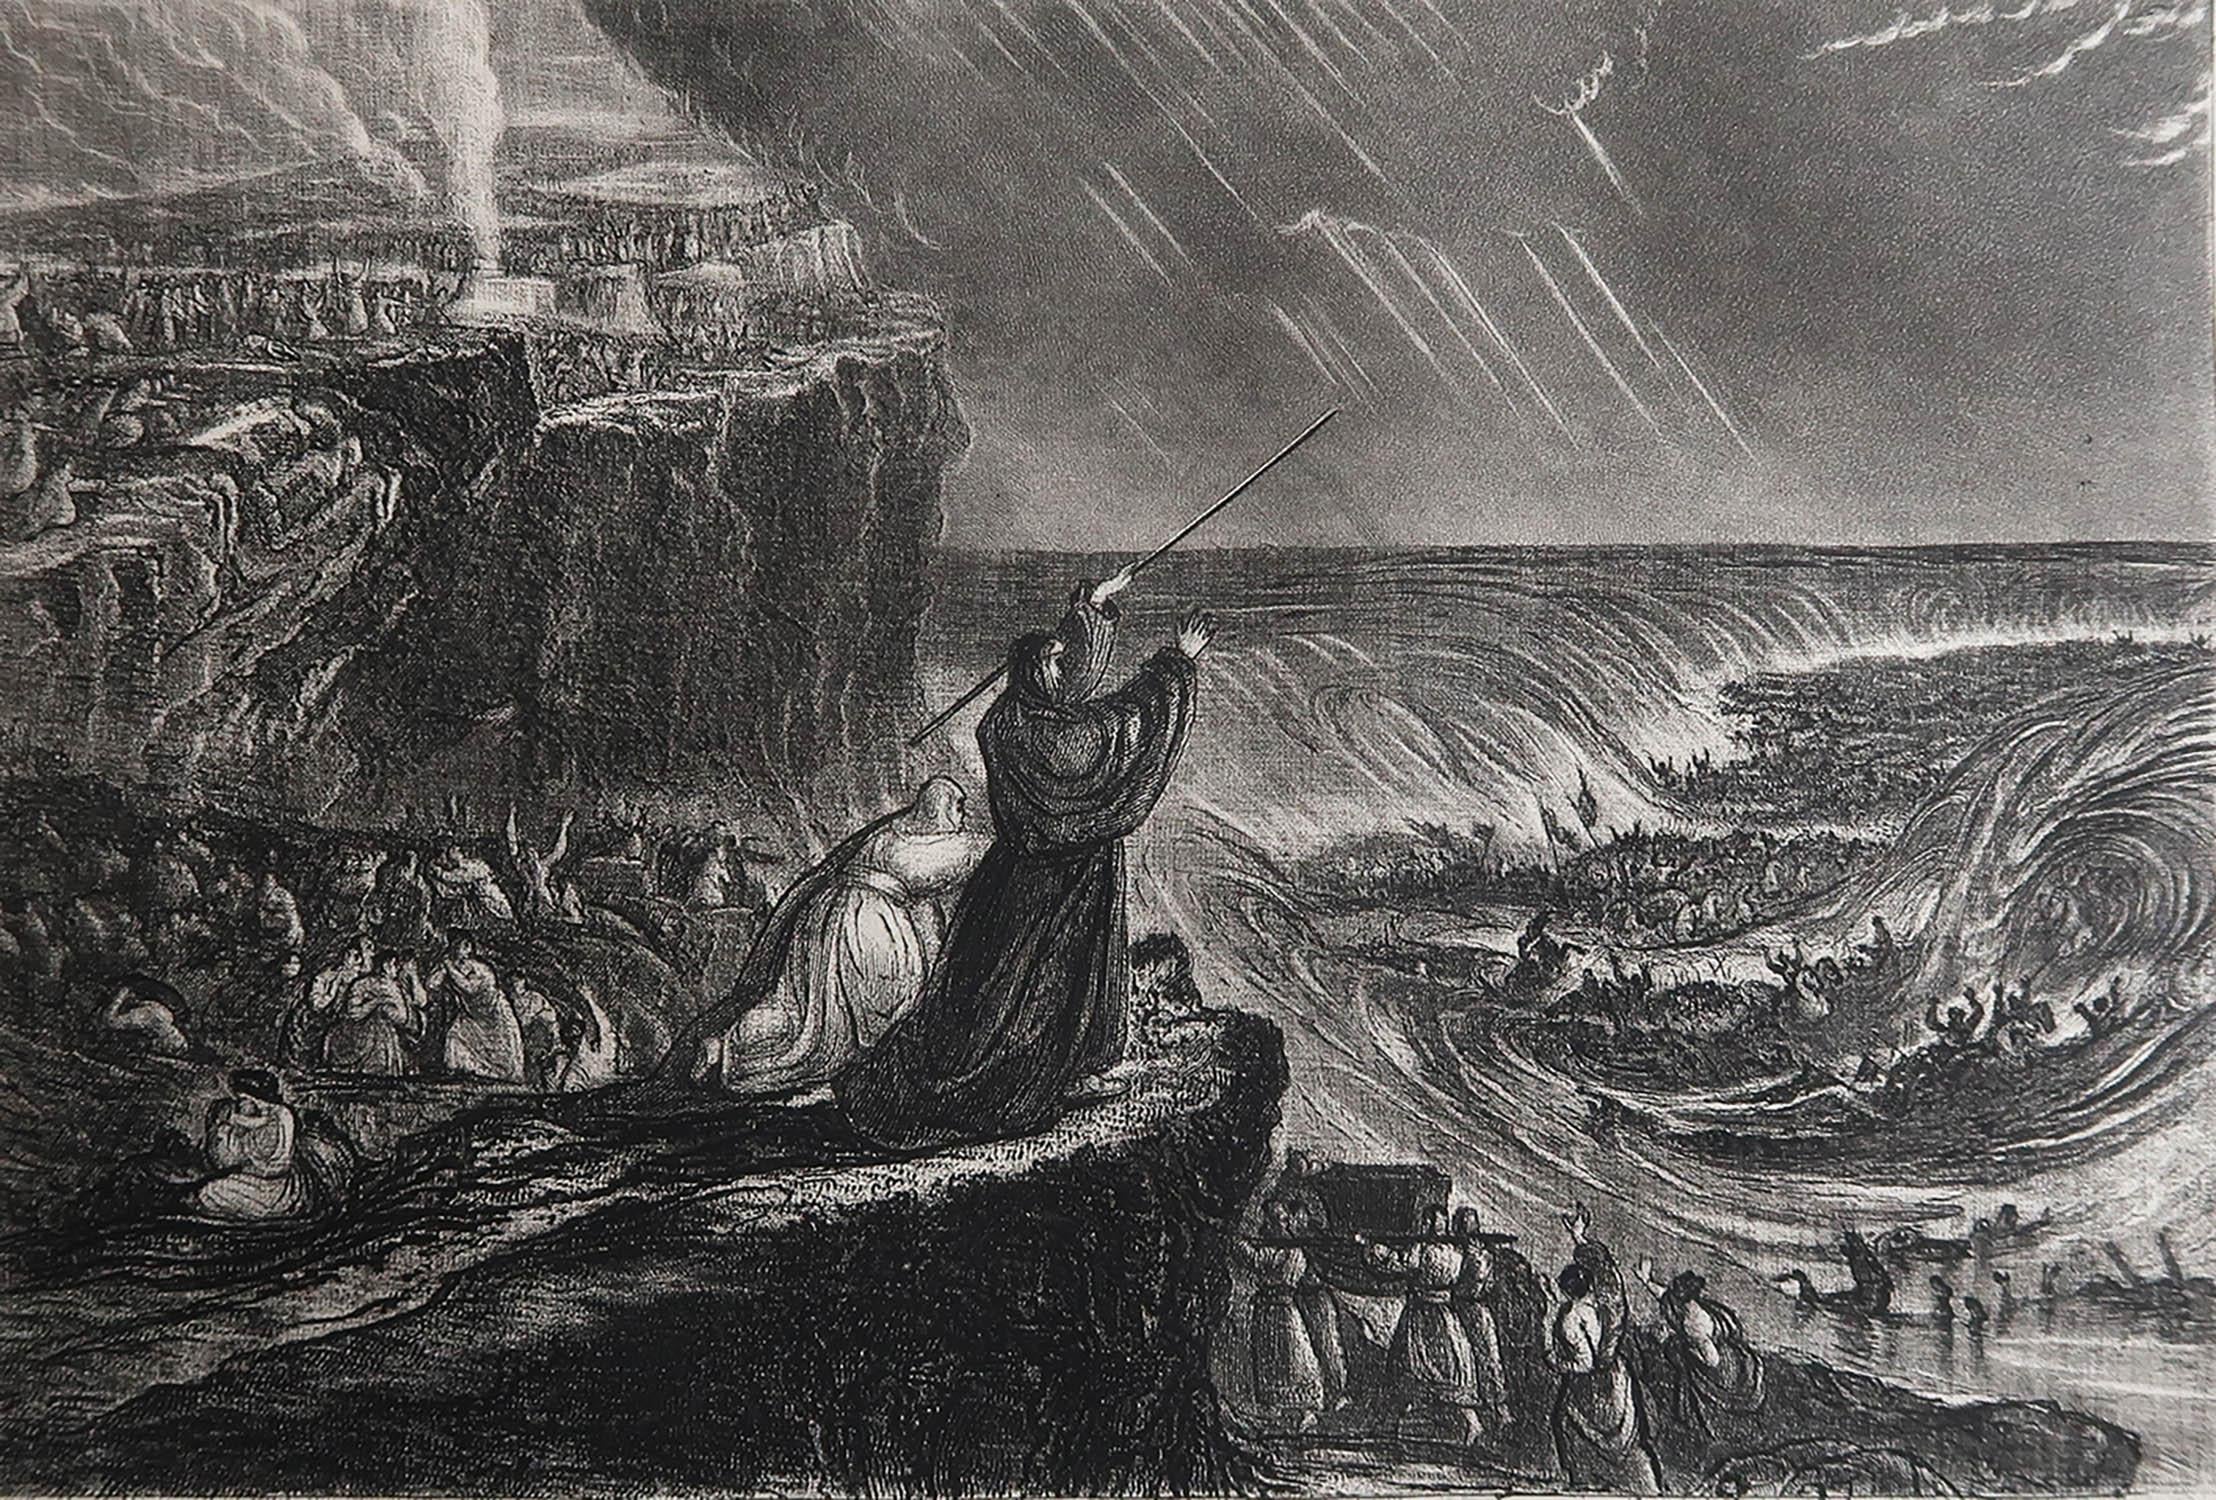 Sensational image by John Martin.

Drawn and engraved by John Martin. 

Published by Sangster

Unframed.

